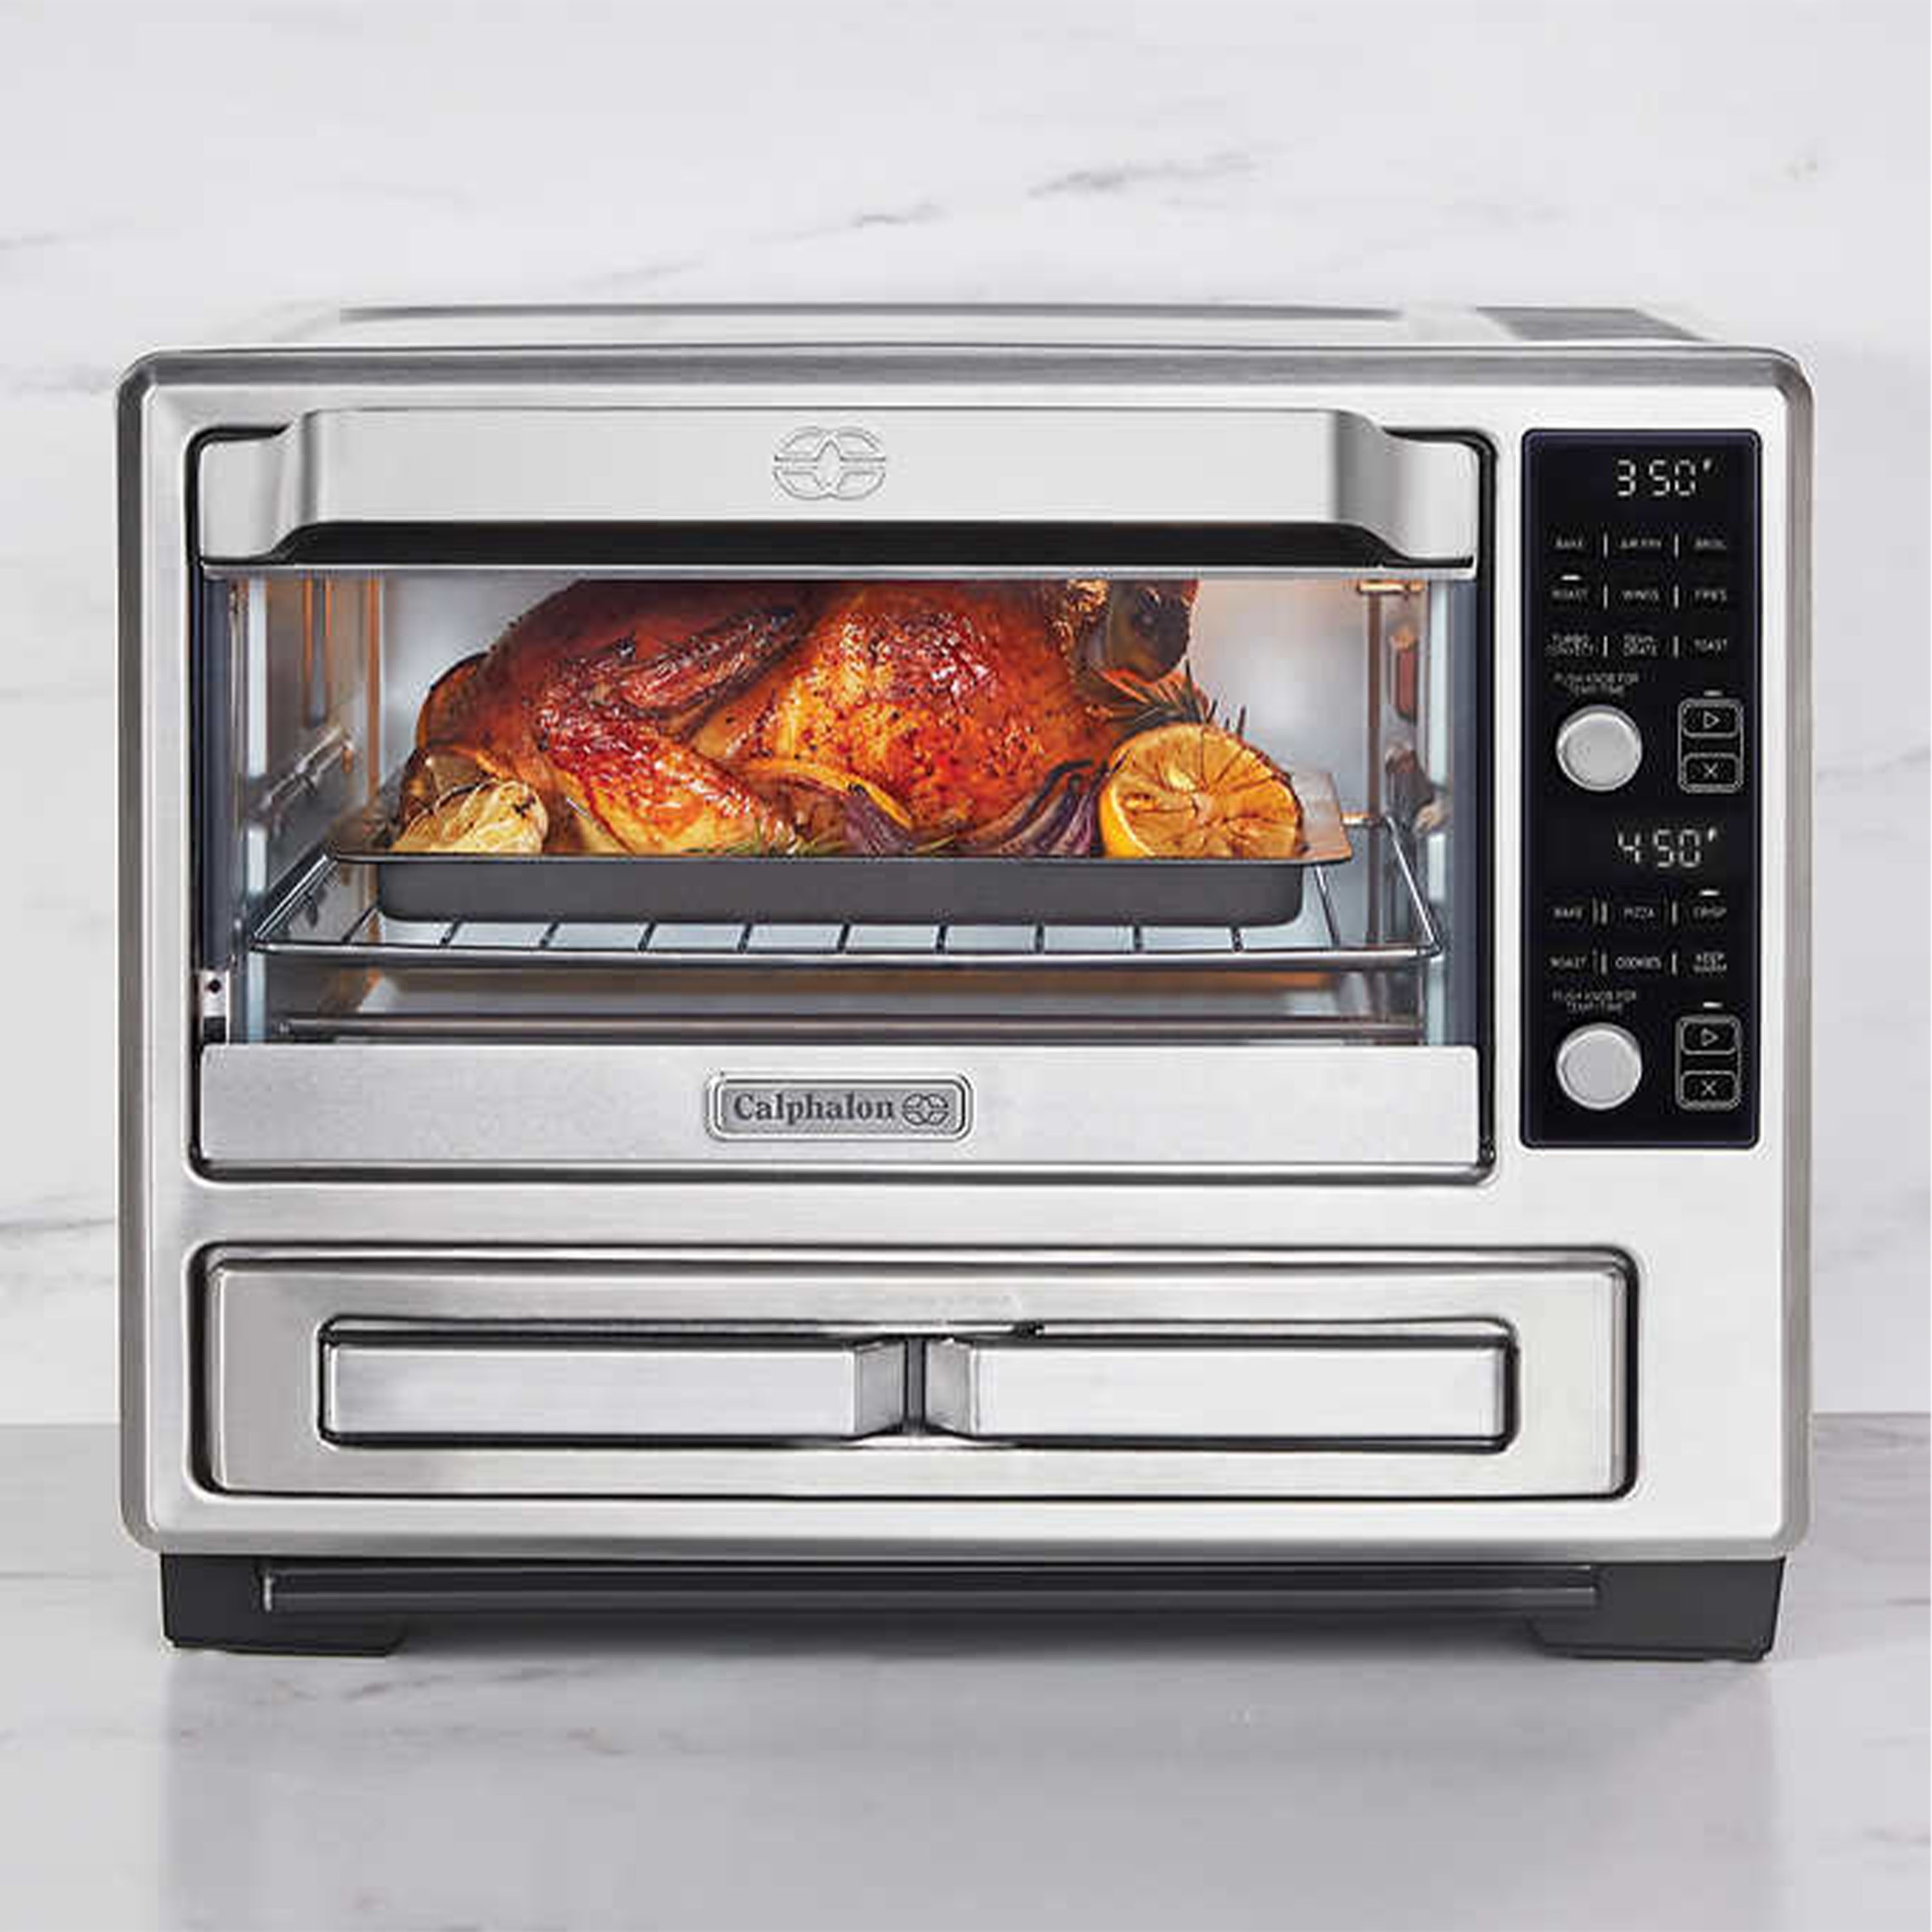 https://ak1.ostkcdn.com/images/products/is/images/direct/be629749d426995f8484b0fec5afeb74b1dcf6bb/Calphalon-Performance-Dual-Oven-with-Air-Fryer.jpg